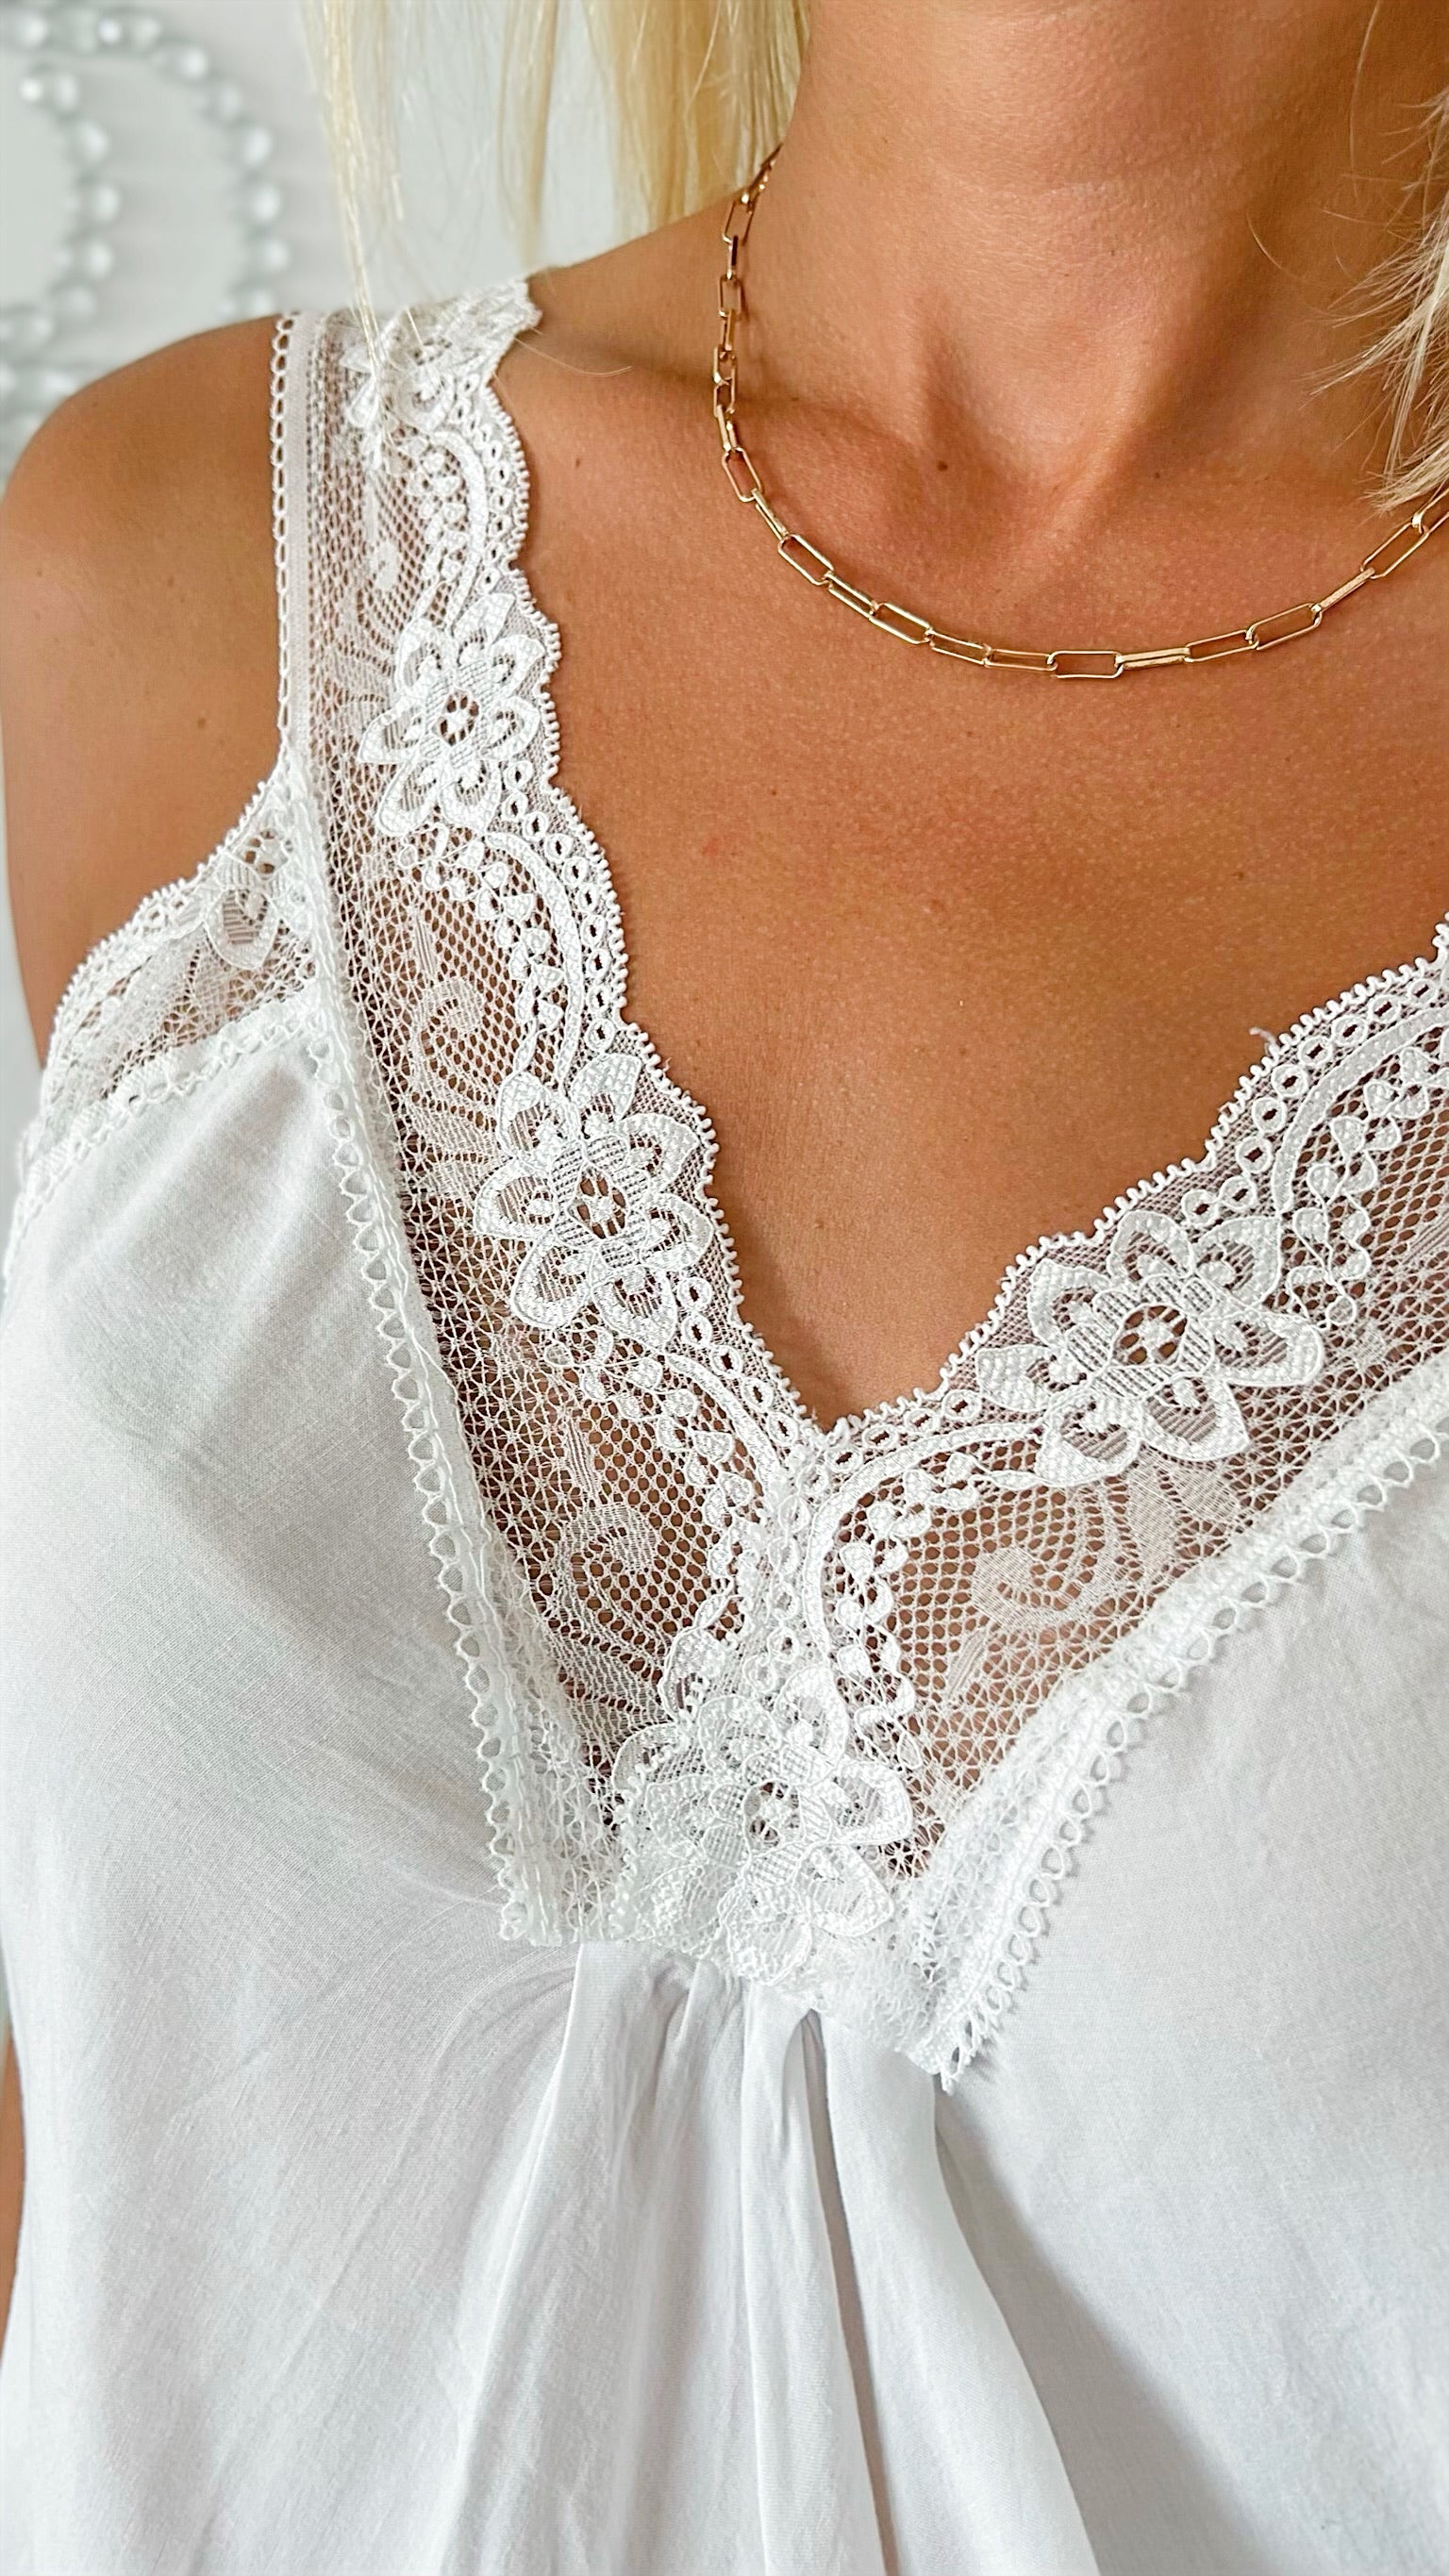 Italian Elegant Lace Trim Cami - White-100 Sleeveless Tops-Italianissimo-Coastal Bloom Boutique, find the trendiest versions of the popular styles and looks Located in Indialantic, FL